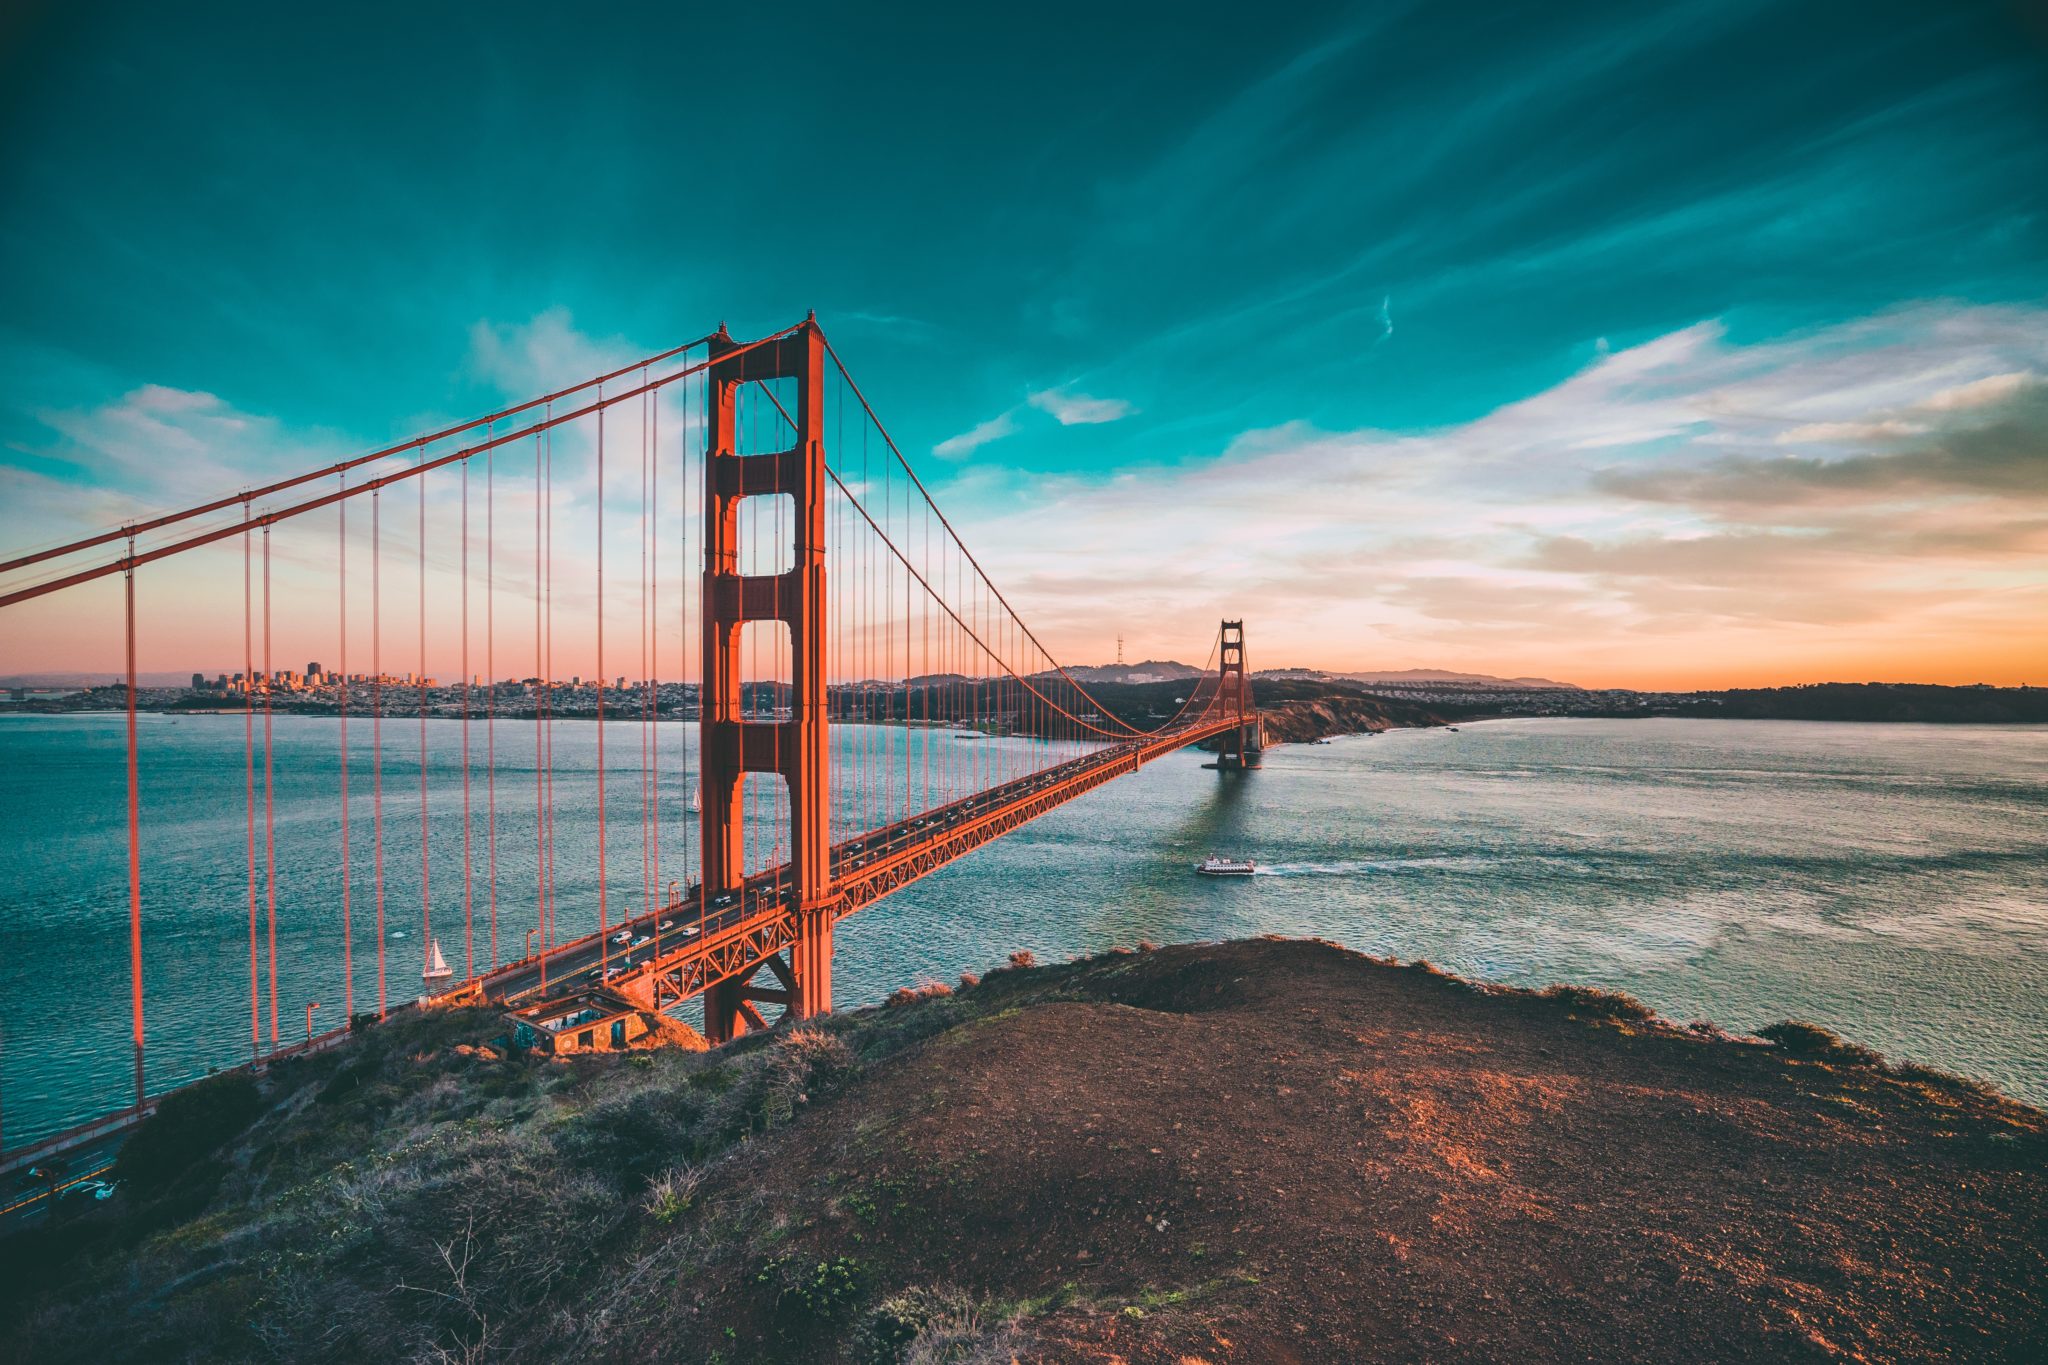 Cali Quests - West Coast Road Trips and Adventures - How To Cross The Golden Gate Bridge For Under $3